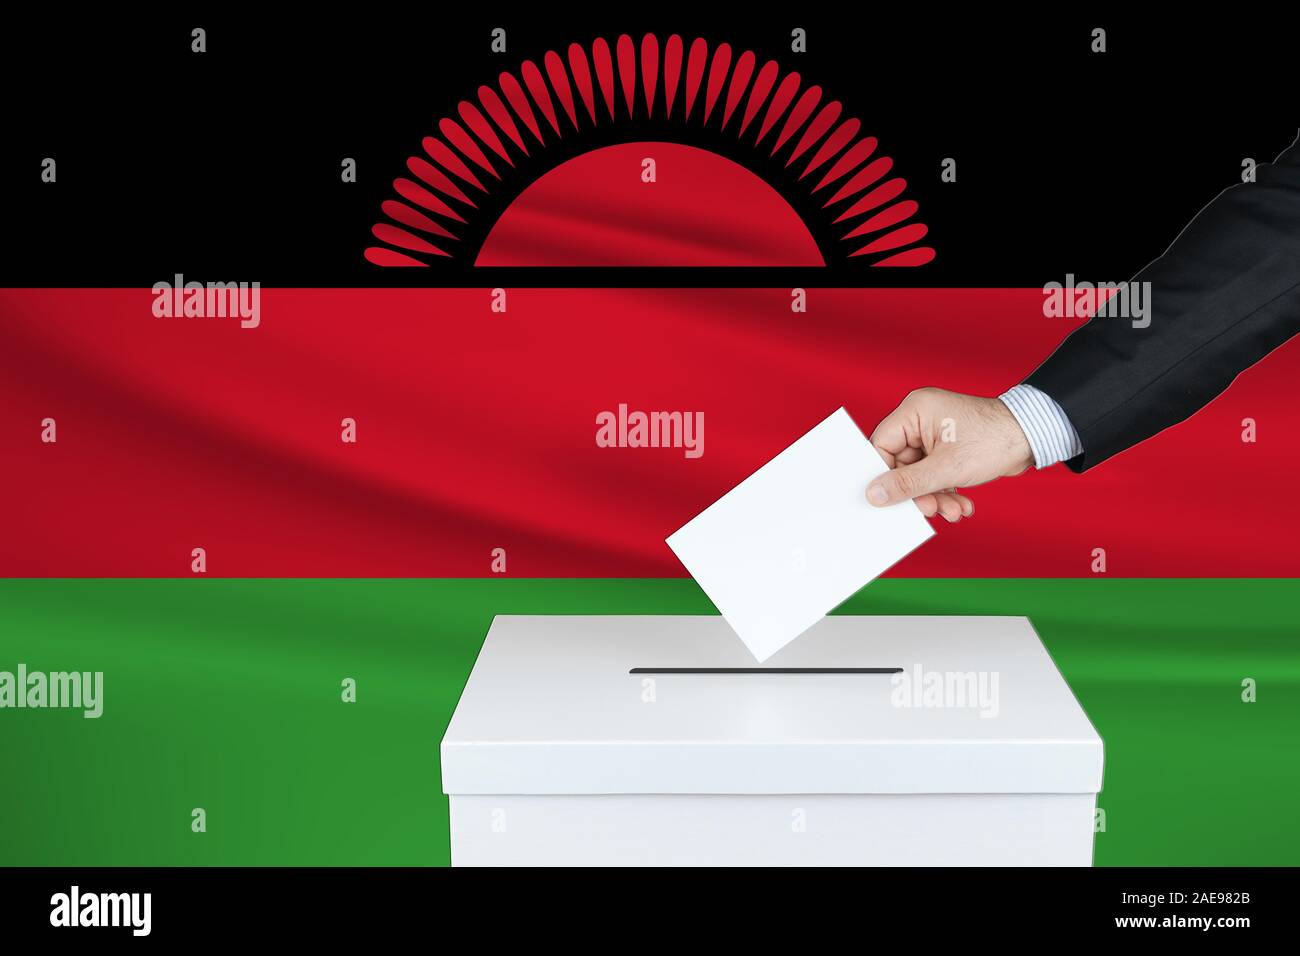 Election in Malawi. The hand of man putting his vote in the ballot box. Waved Malawi flag on background. Stock Photo